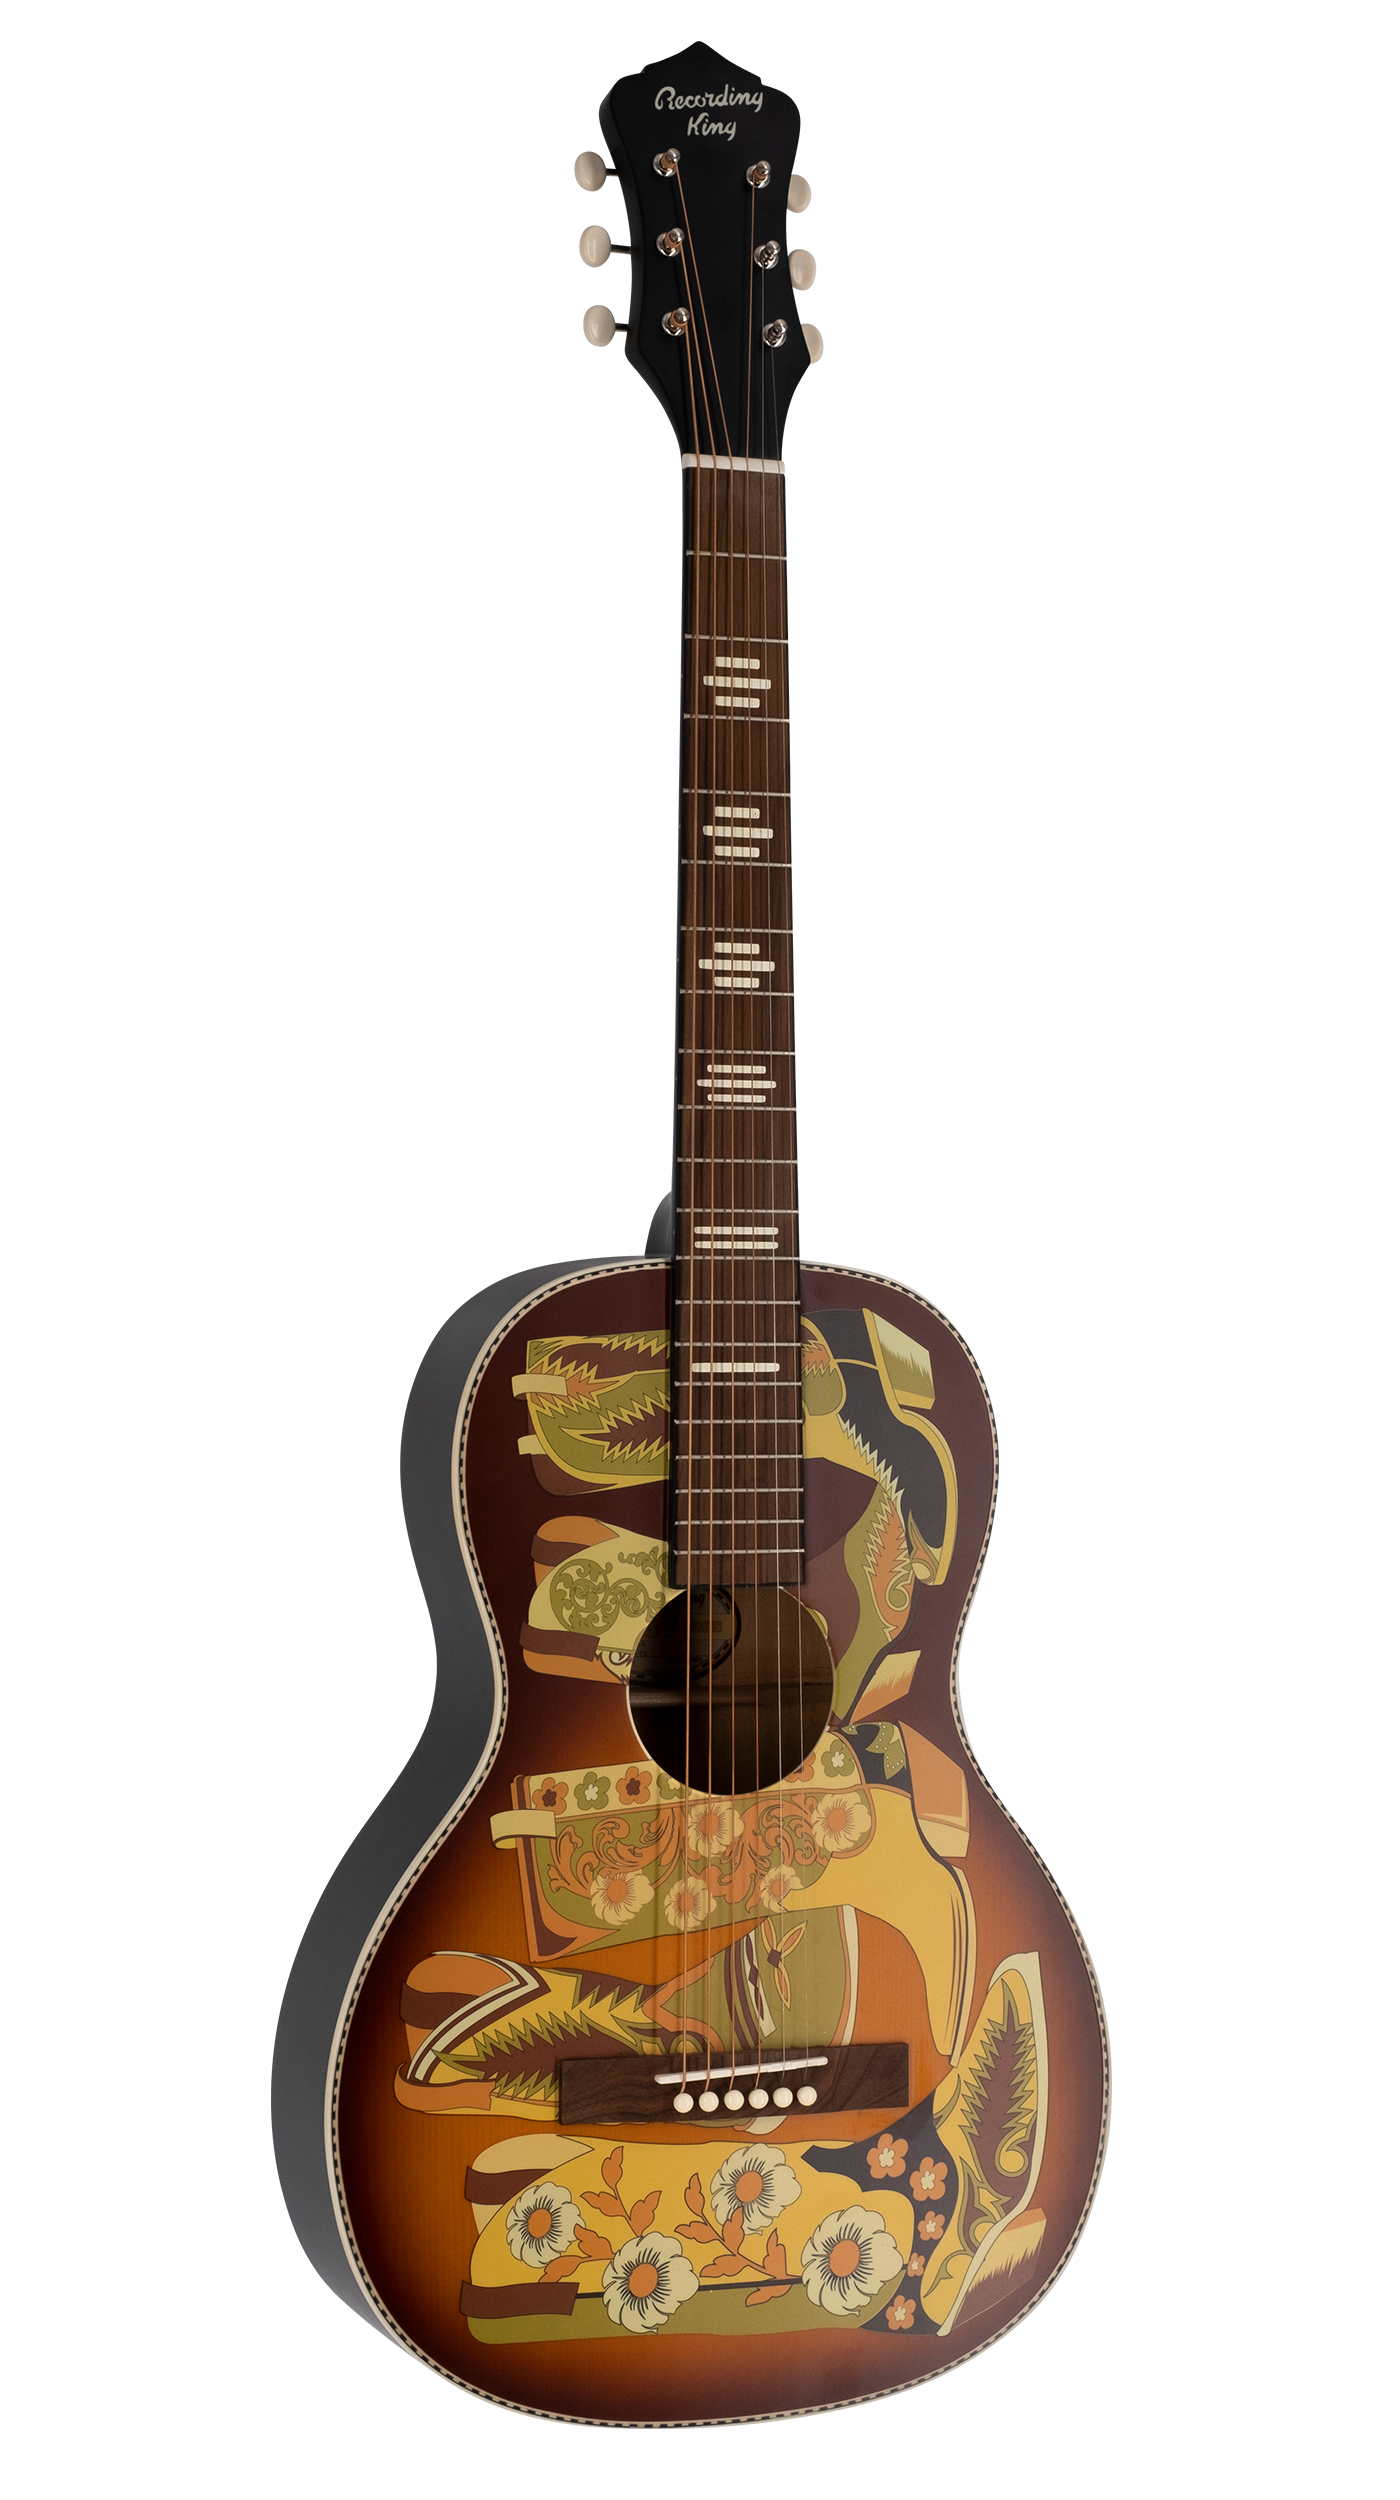 Dirty 30s Series 7 Cowboy Boot Limited Edition